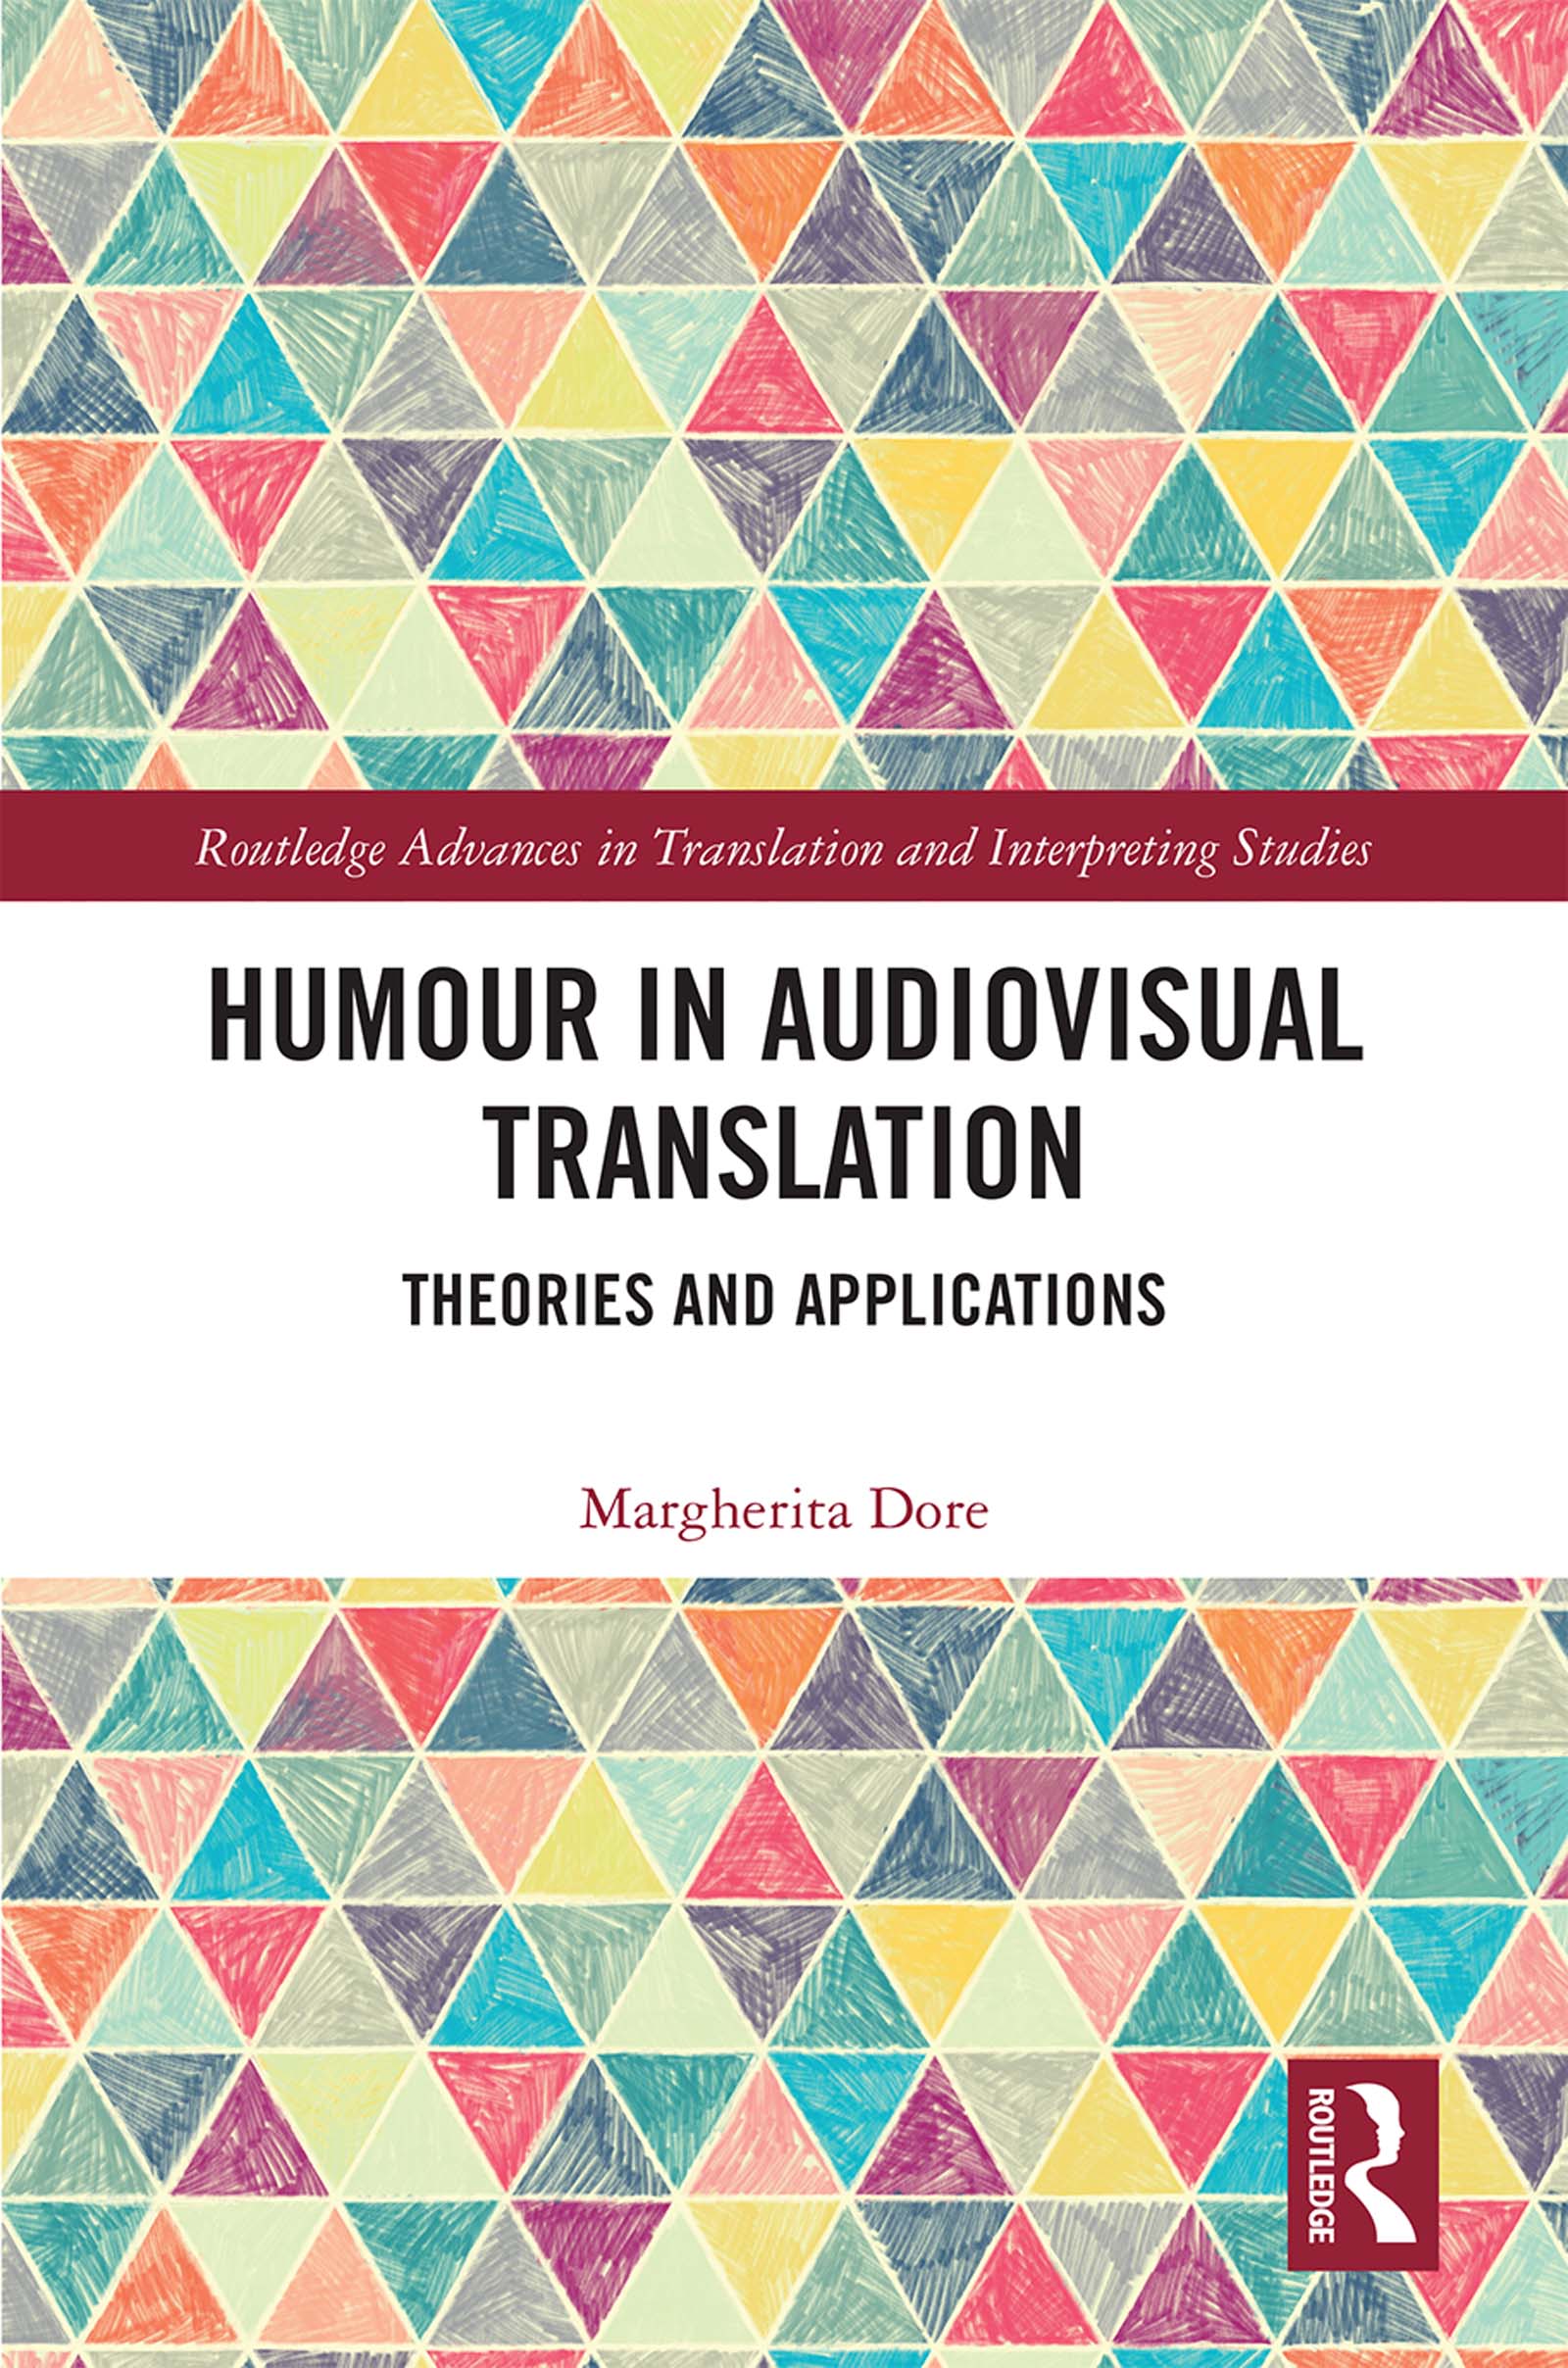 Humour in Audiovisual Translation: Theories and Applications book cover